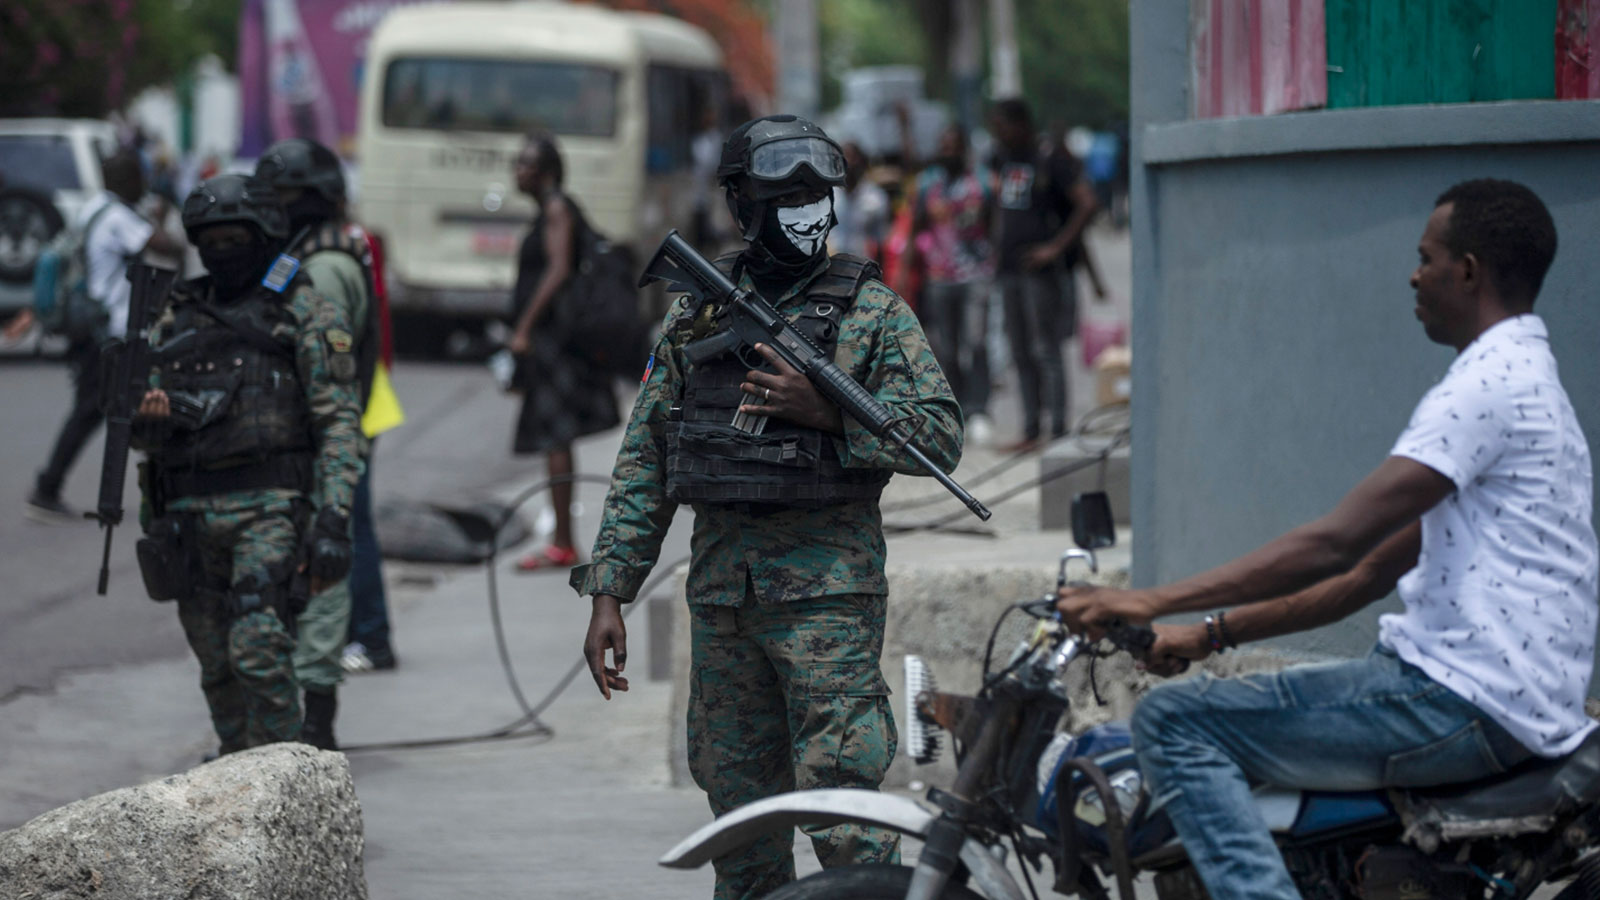 Thousands trapped as gangs battle for control in Port-au-Prince